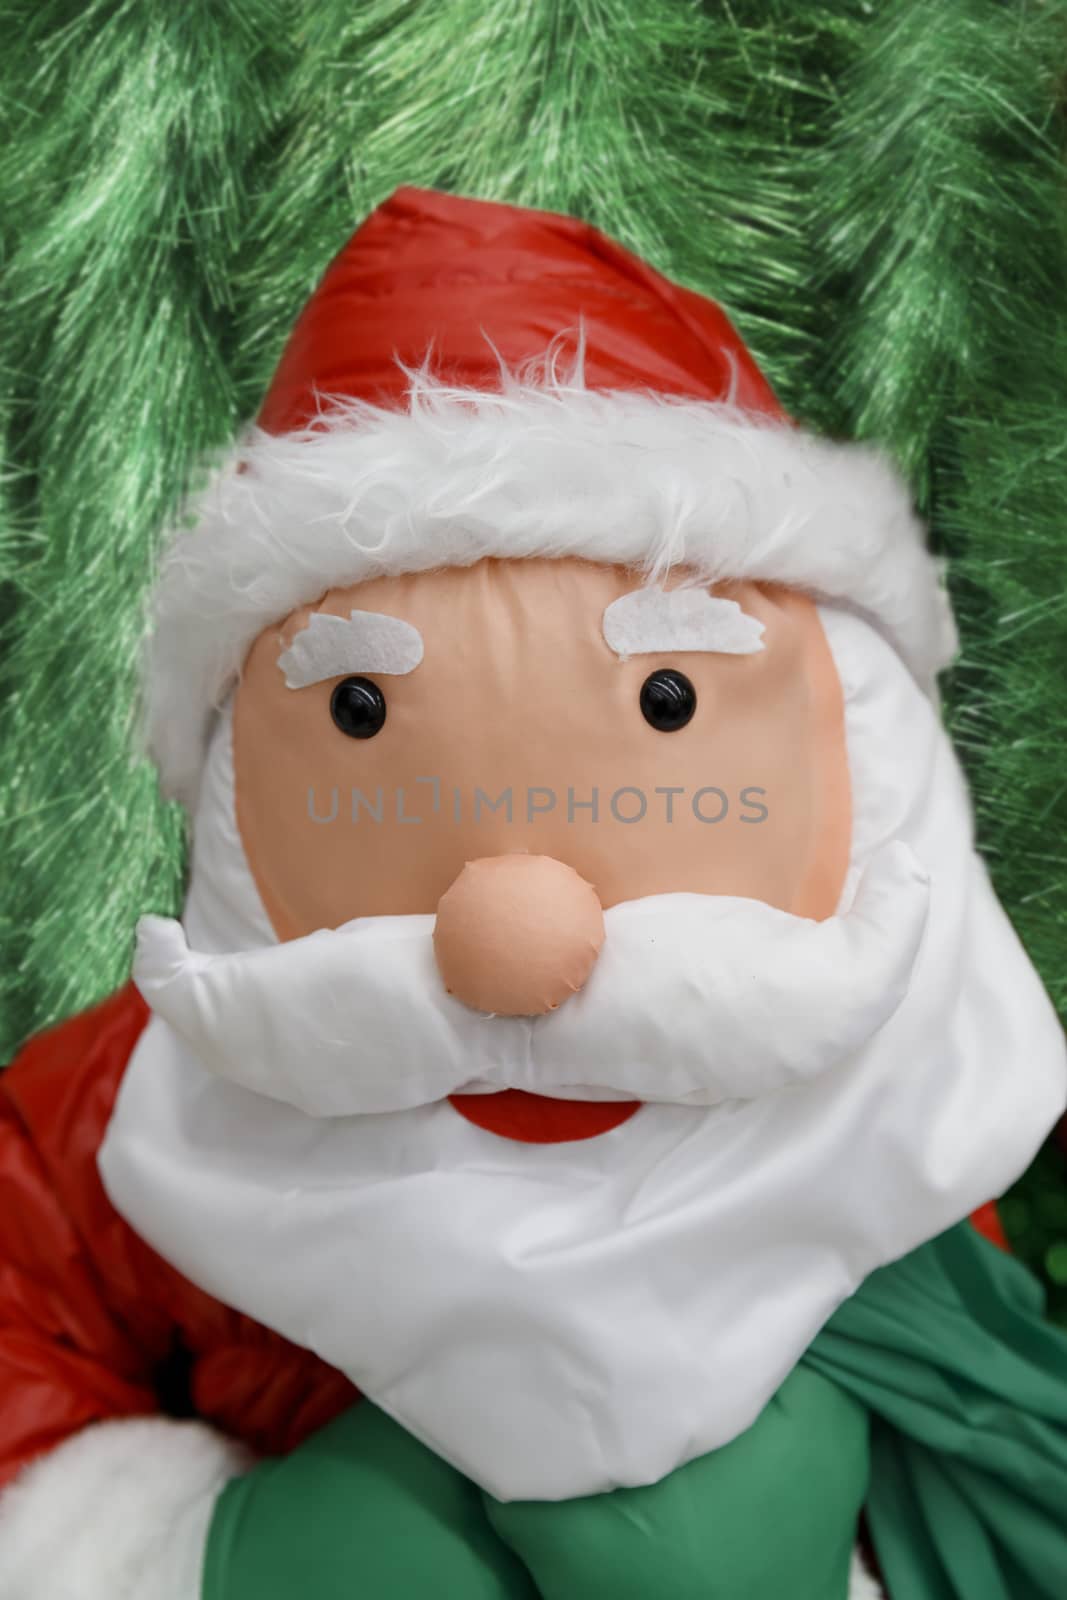 Christmas decoration on abstract background. New Year's Santa Claus is a traditional Christmas decoration.